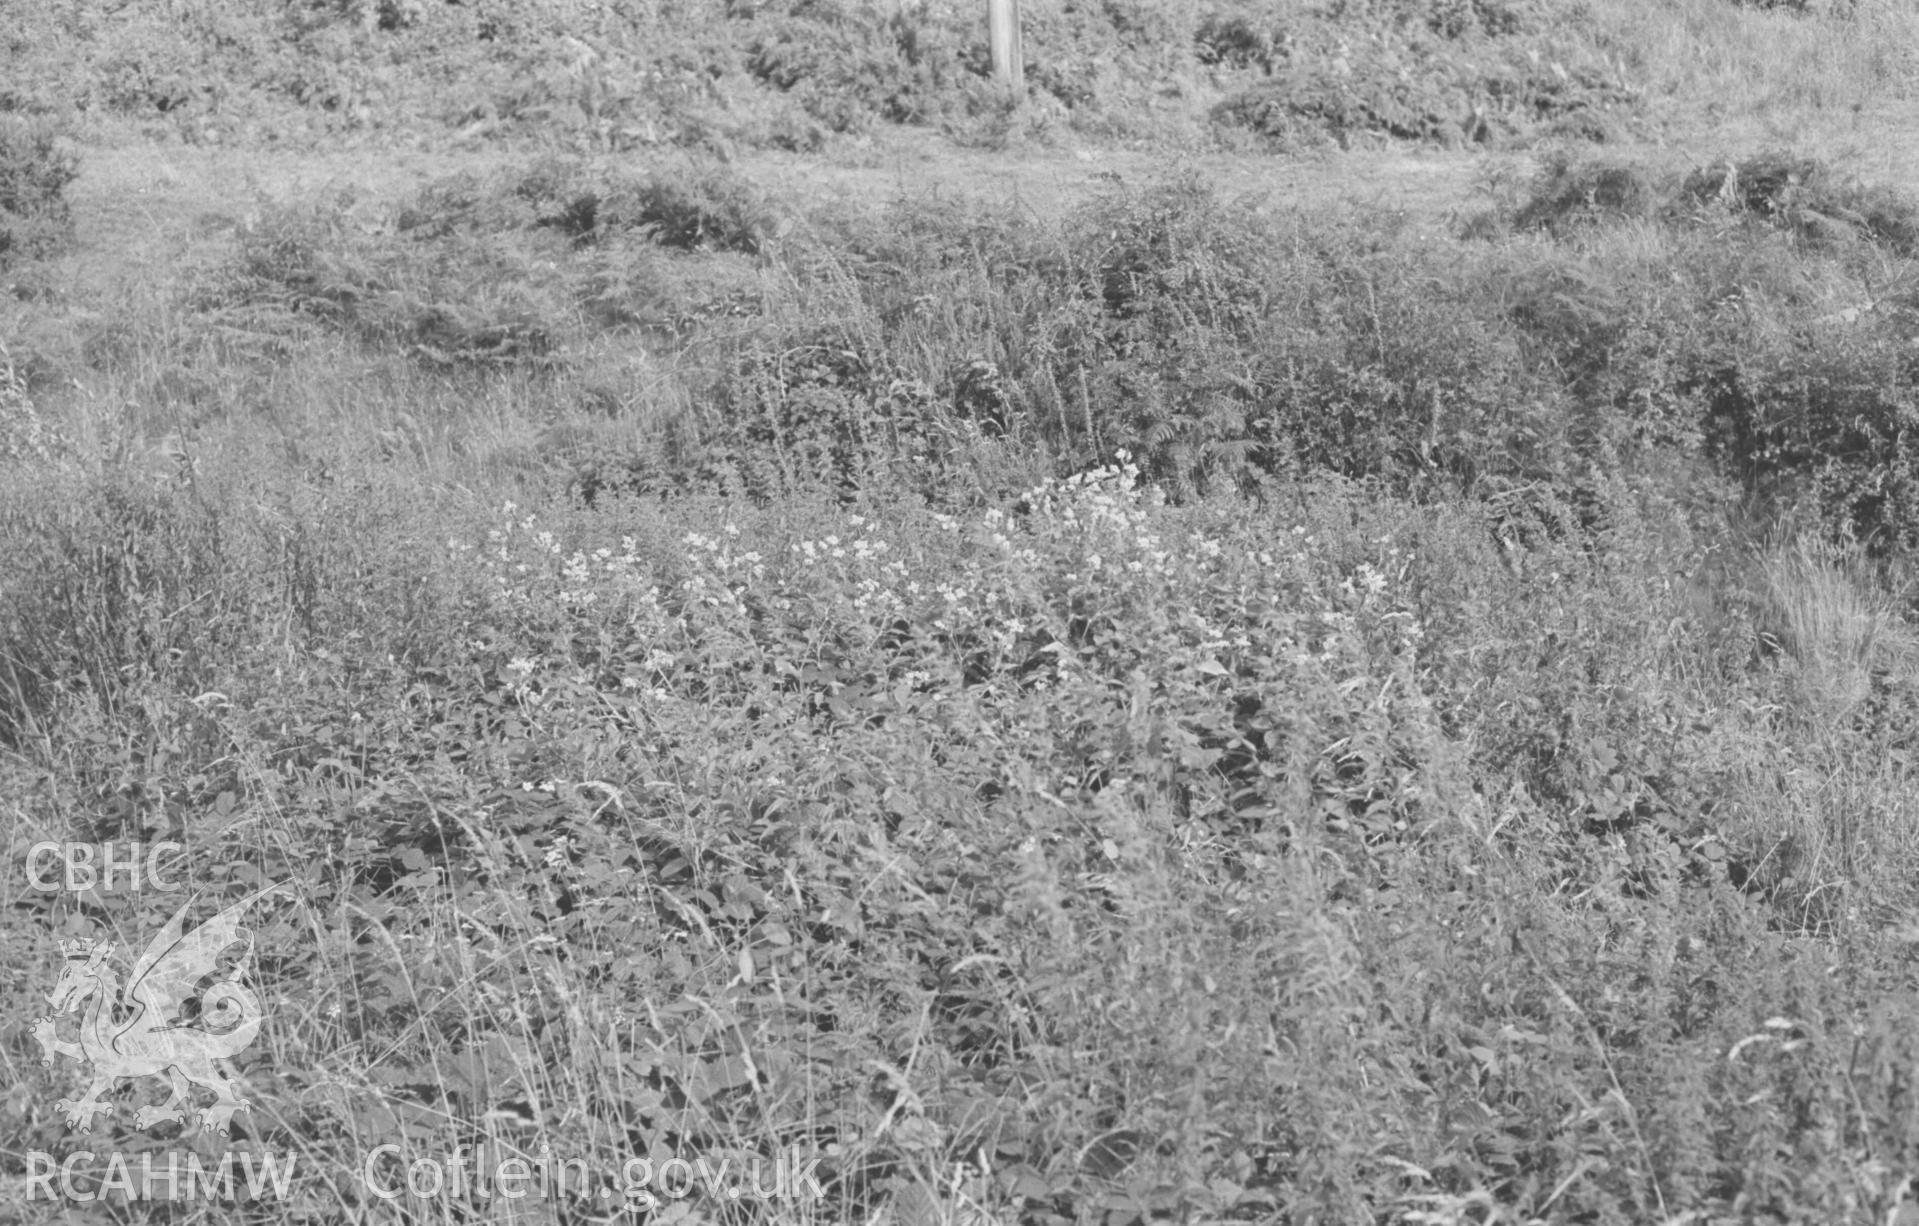 Digital copy of a black and white negative showing Polygonum campanulatum growing between the road and the stream in Llanafan village. Photographed by Arthur Chater on 17 August 1968. Looking south from Grid Reference SN 692 729.